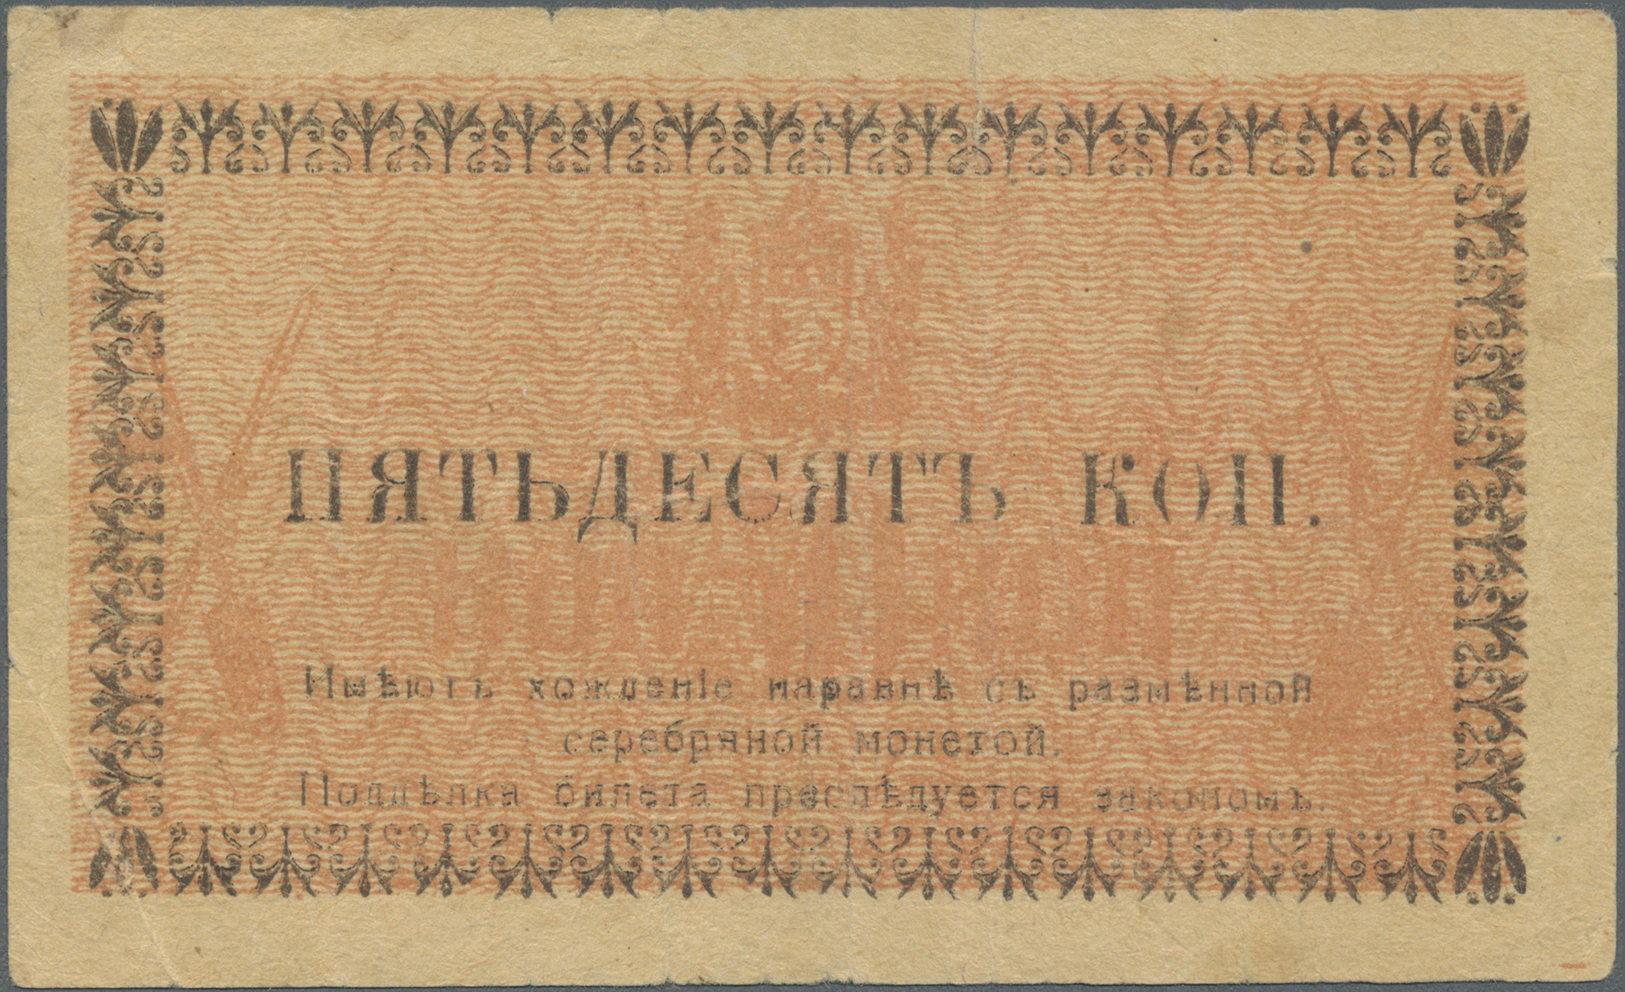 01337 Kazakhstan / Kasachstan: 50 Kopeks ND(1918) P. S1117 In Used Condition With Several Folds, Condition: F. - Kazakhstan